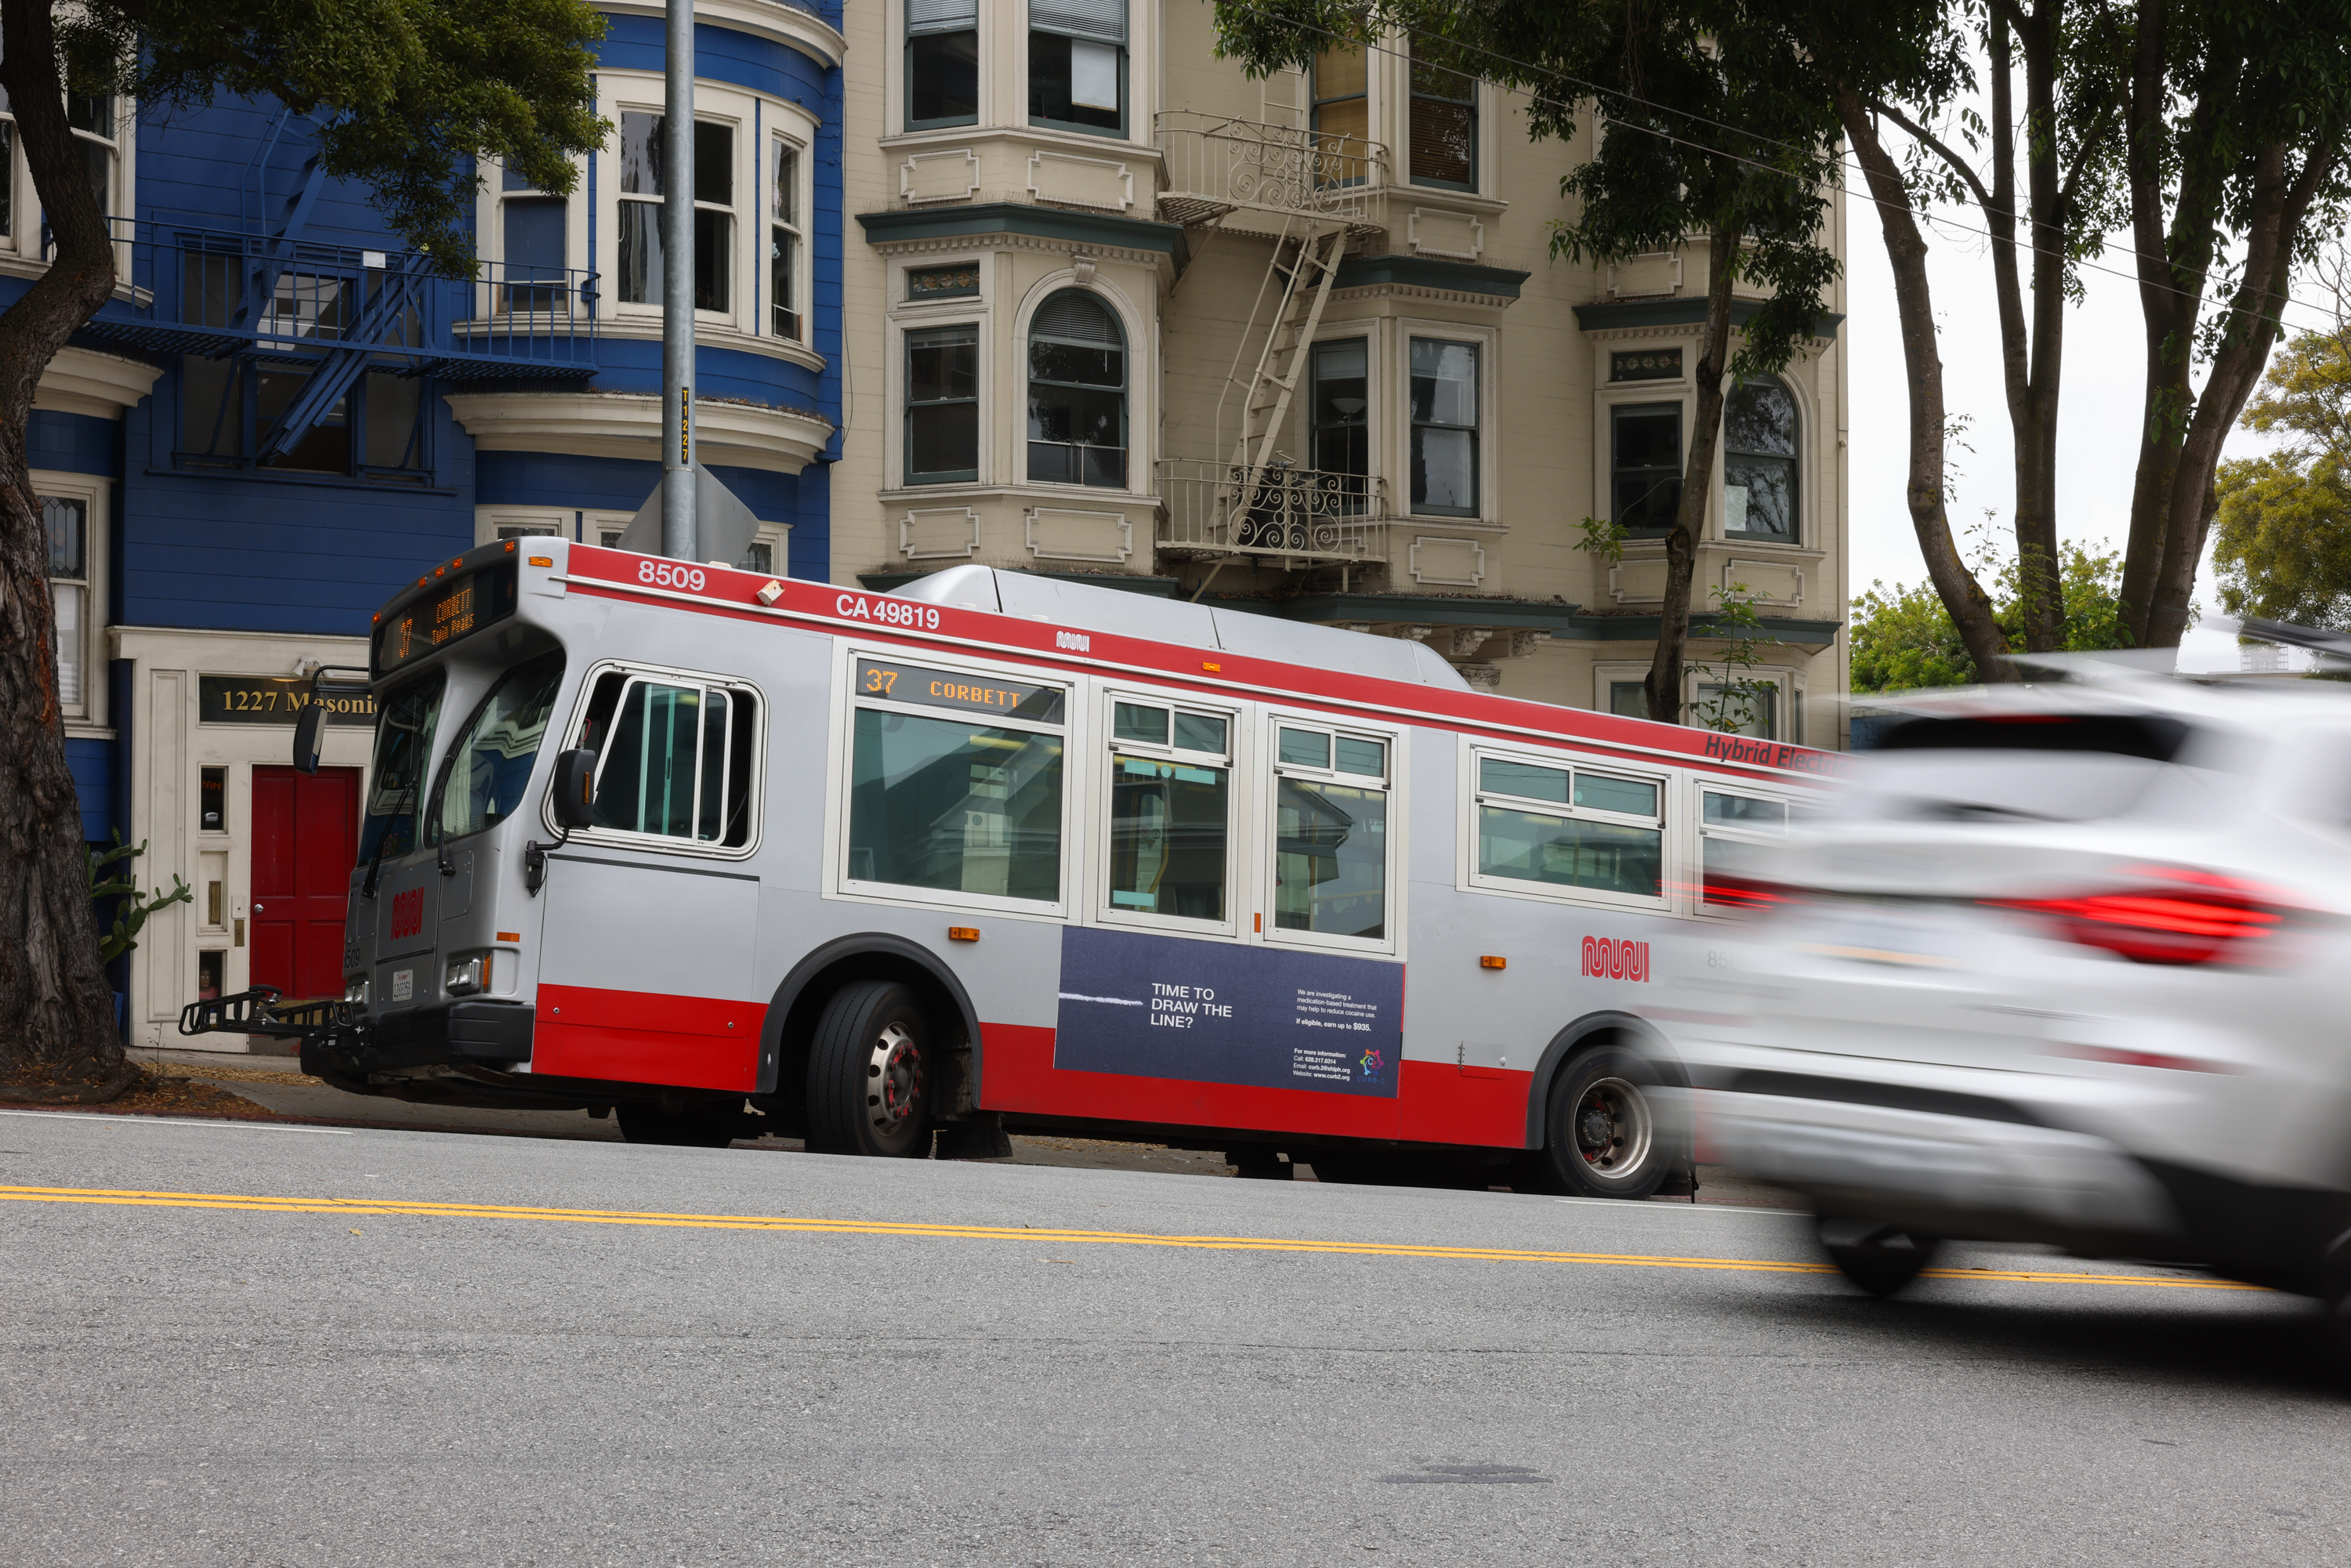 A city bus parked by the curb with a blurred car passing by in front, and classic houses in the background.